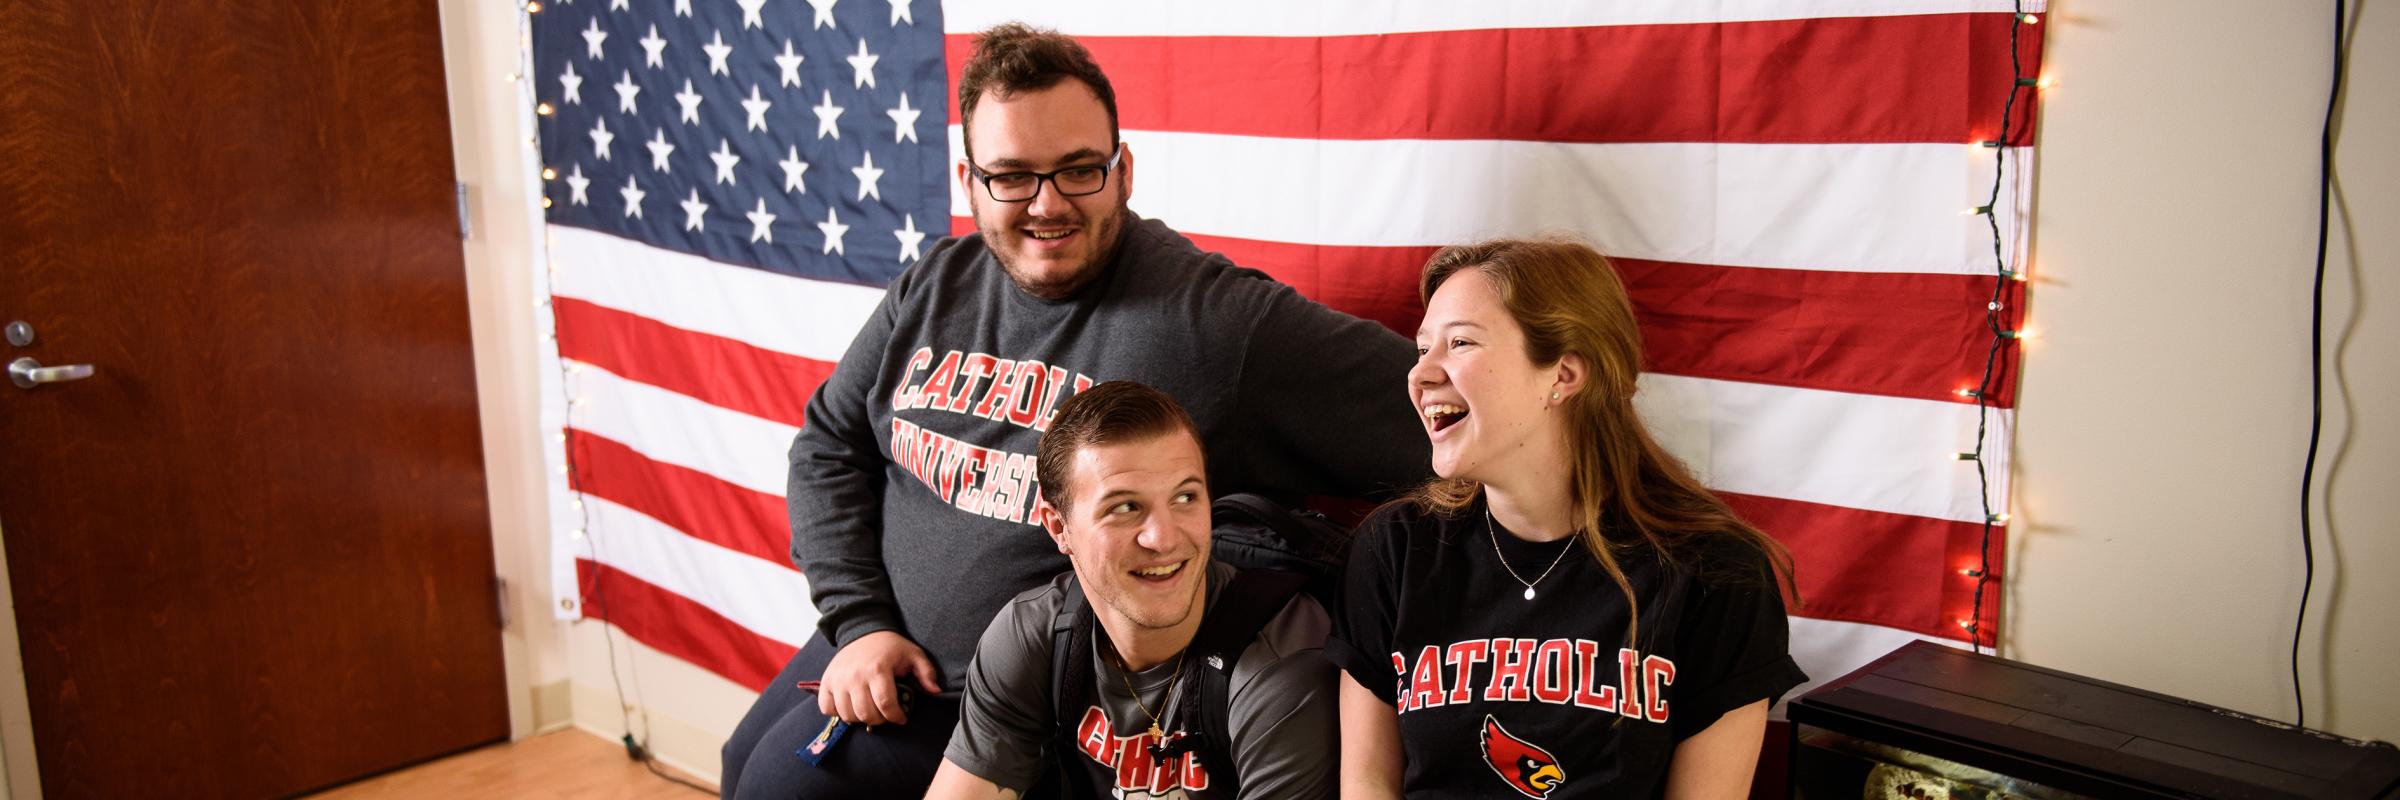 Students smiling in a dorm with a U.S. flag behind them